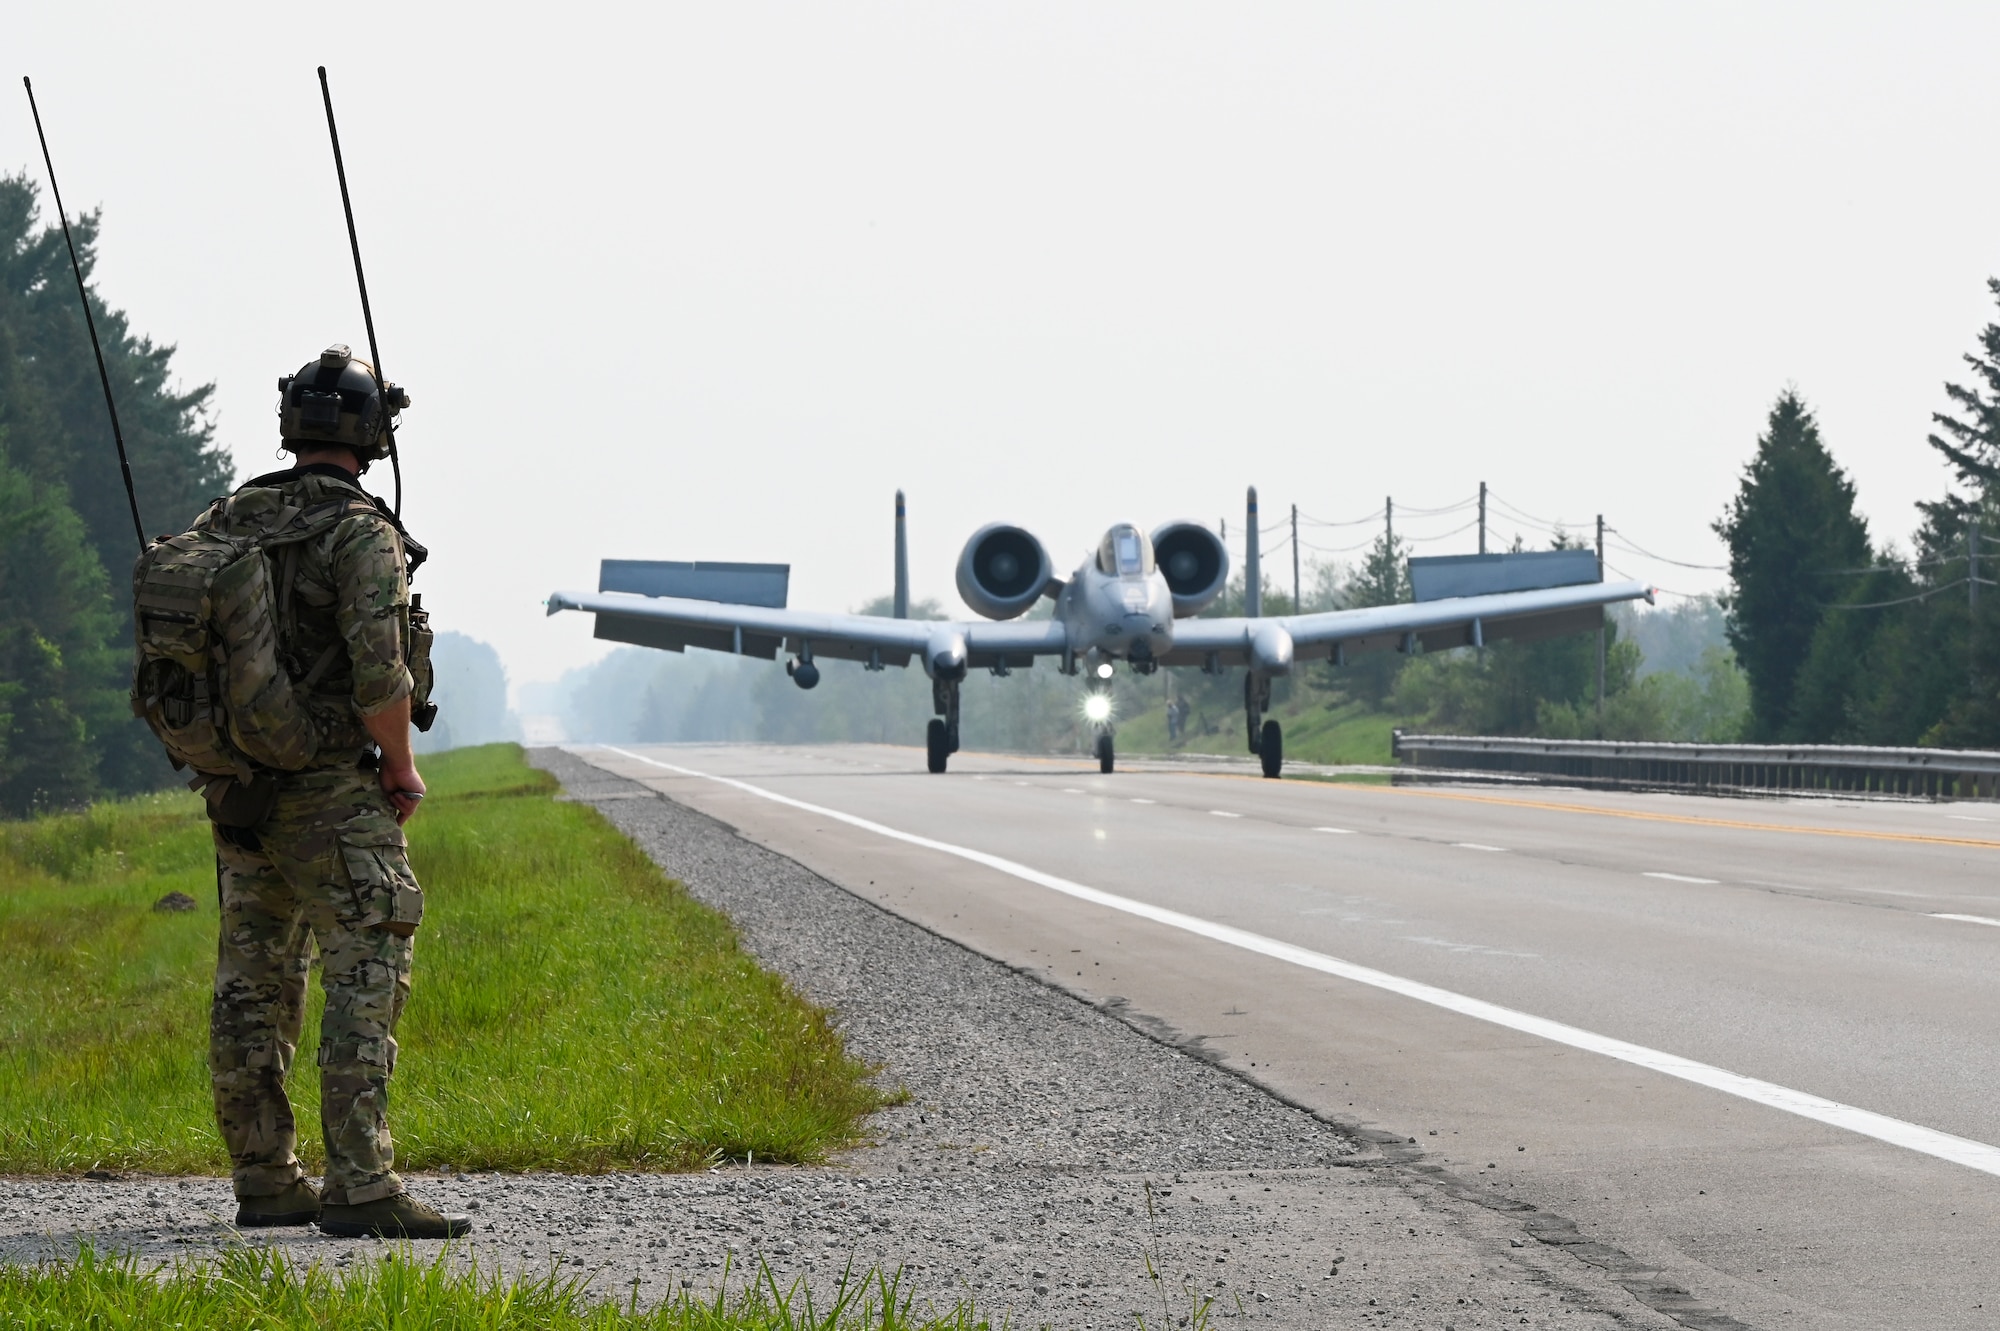 A U.S. Air Force 127th Wing A-10 Thunderbolt II, with ground air traffic control and guidance provided by Special Tactics operators from the 24th Special Operations Wing, lands on a closed public highway Aug. 5, 2021 at Alpena, Mich., for the first time ever as part of a training exercise during Northern Strike 21. The joint training event tested part of the agile employment concept, focusing on projecting combat power from austere locations. (U.S. Air Force photo by Staff Sgt. Ridge Shan)